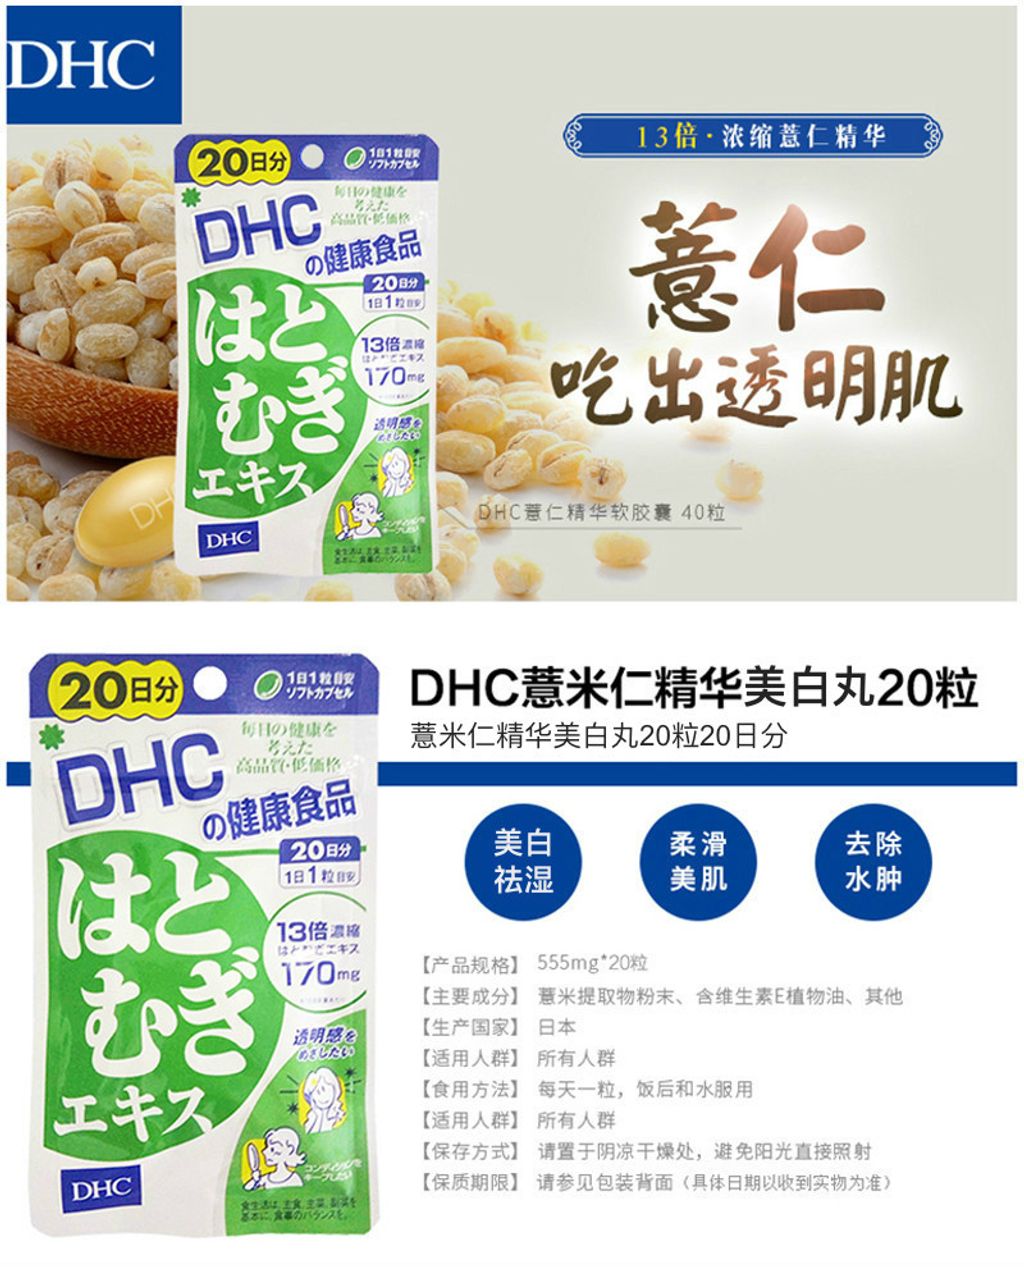 DHC Pearl Barley Extract Capsule Supplement (20 Days 20粒) S002.jpeg